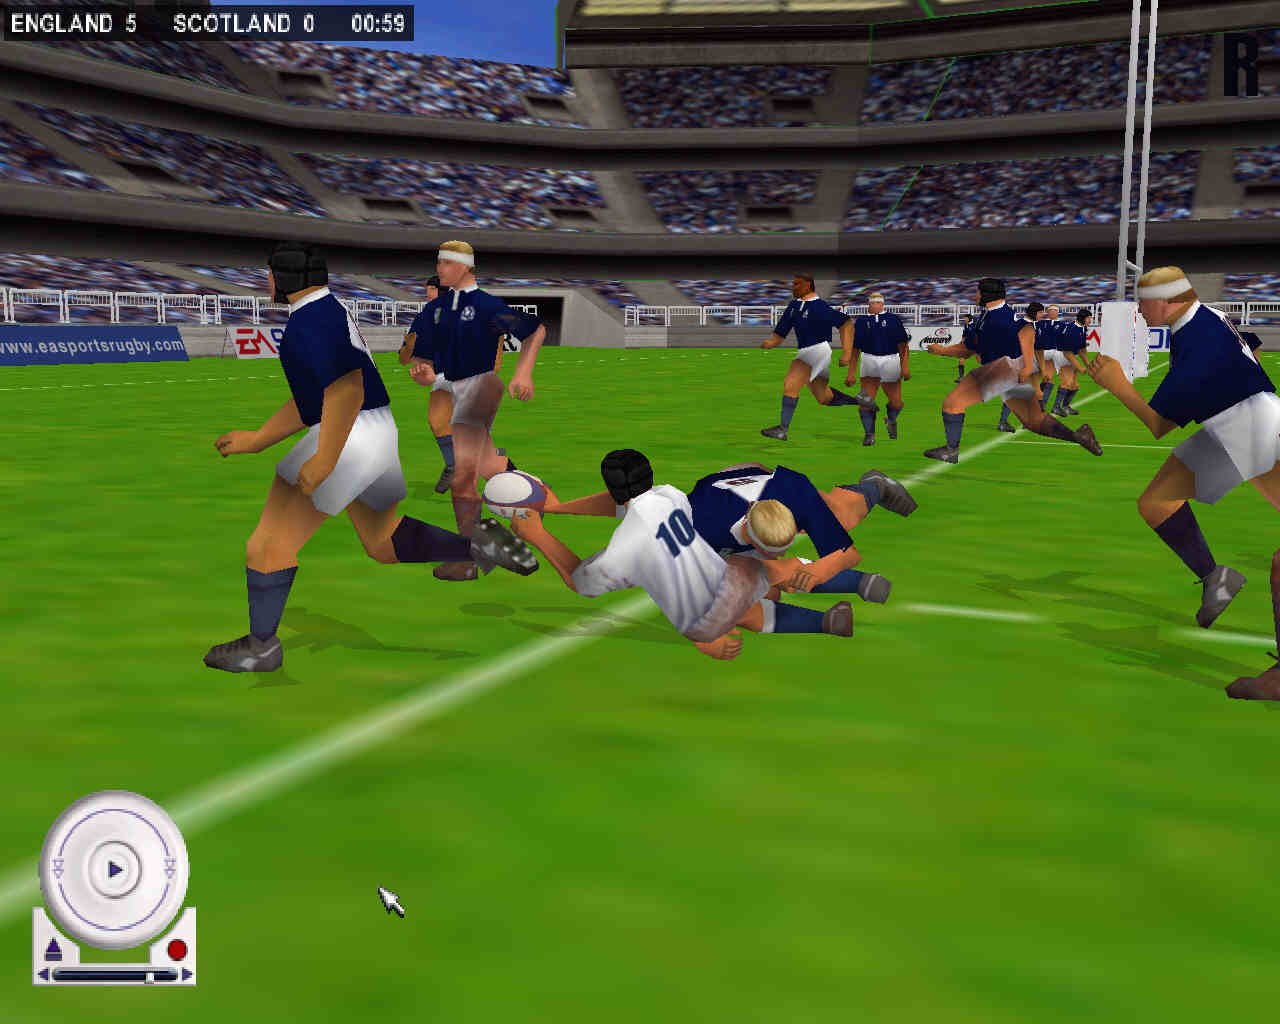 rugby 08 wii